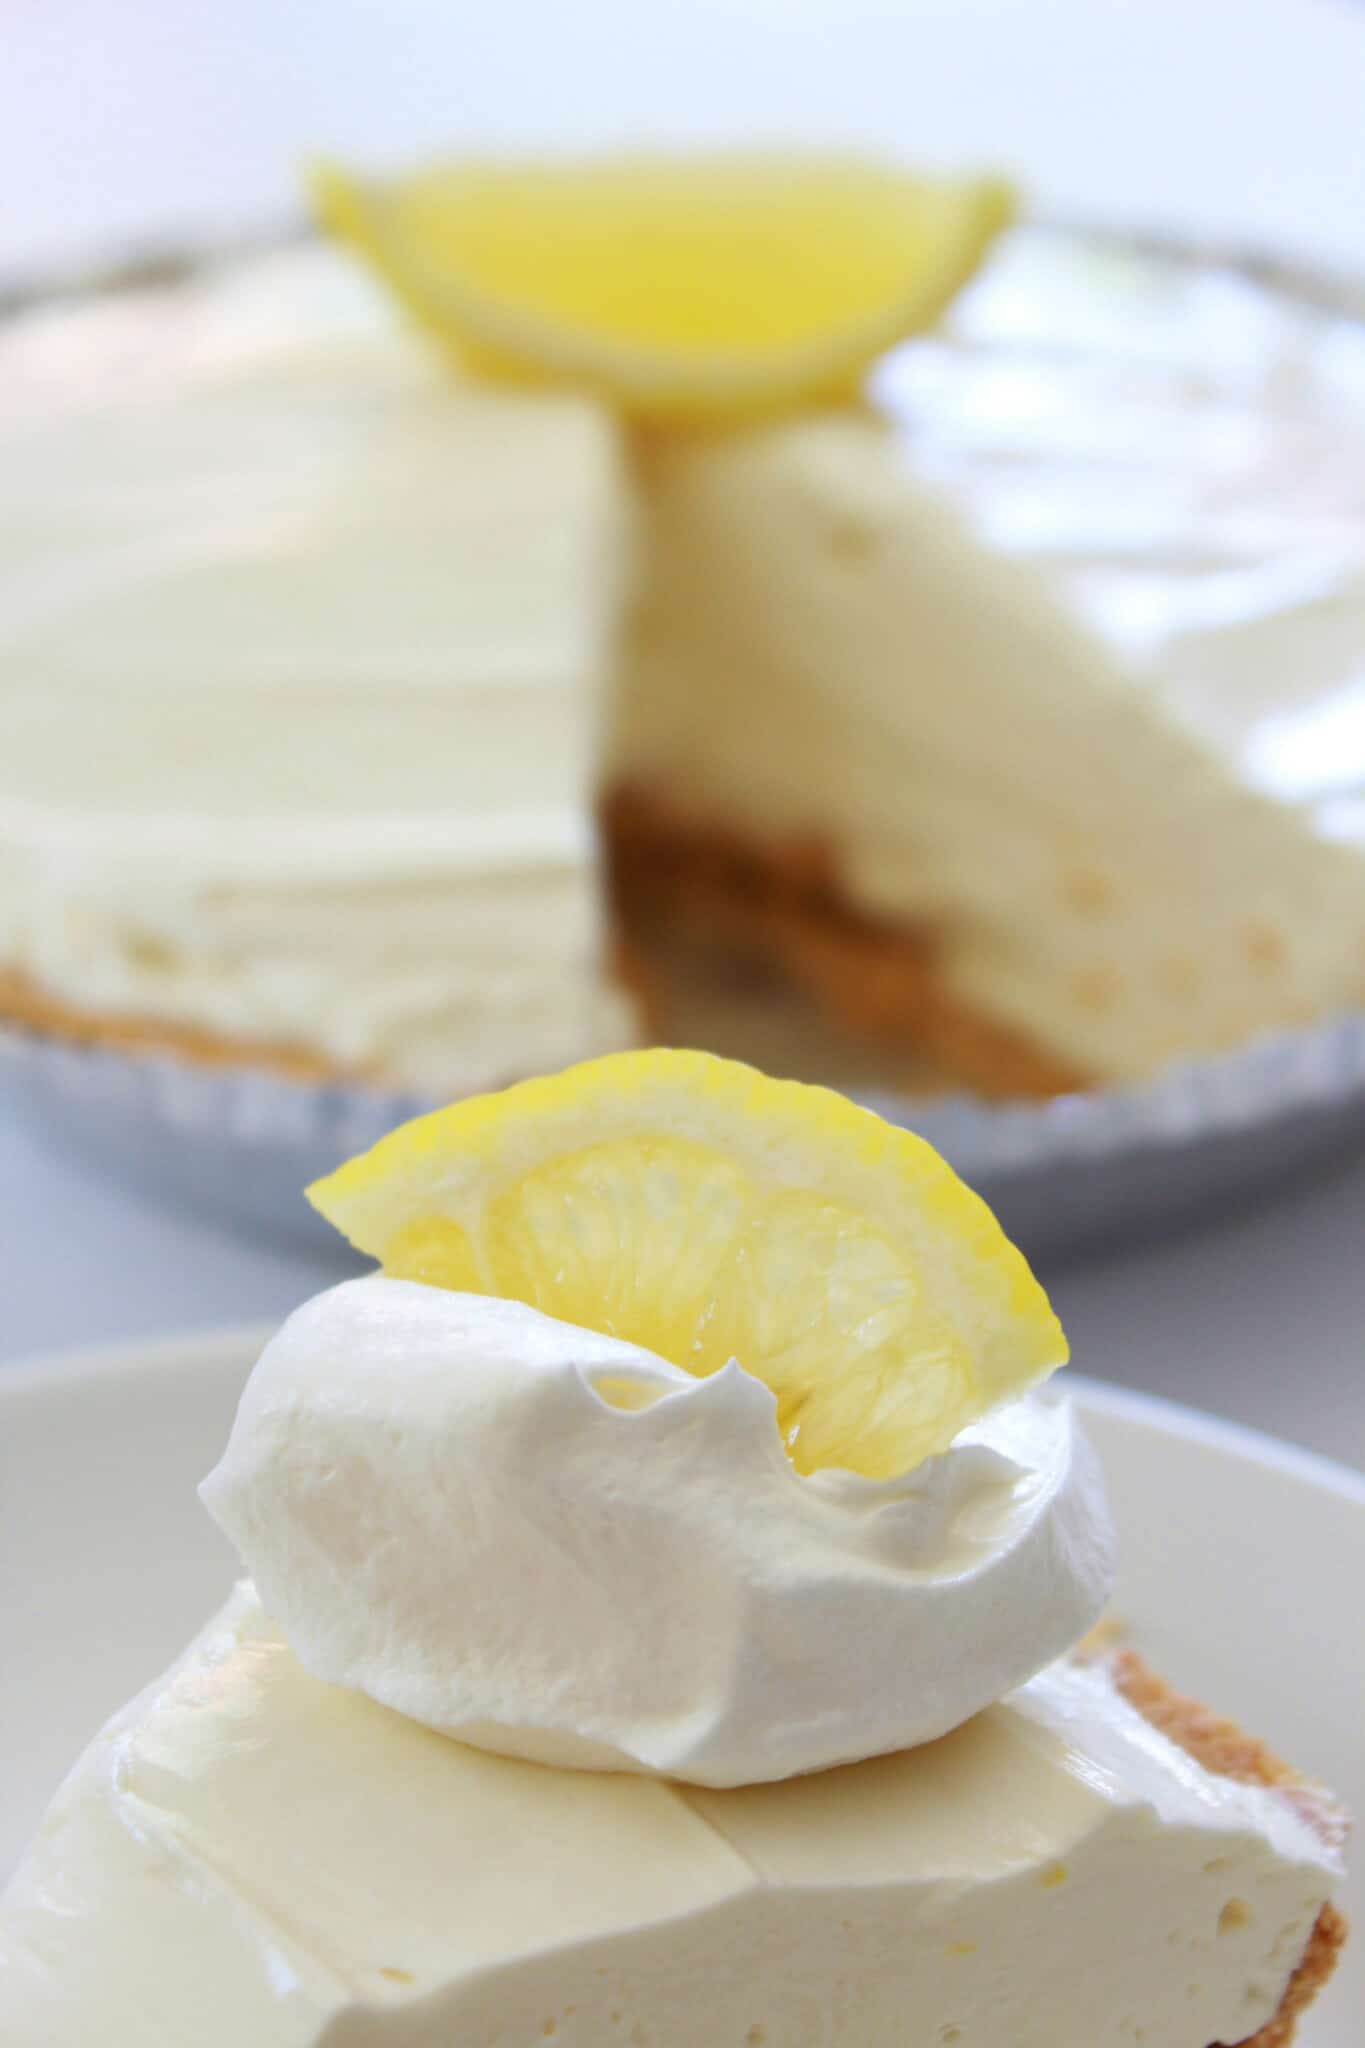 No Bake Lemon Cheesecake Recipe with 5 ingredients, a recipe featured by top US food blog, Practically Homemade